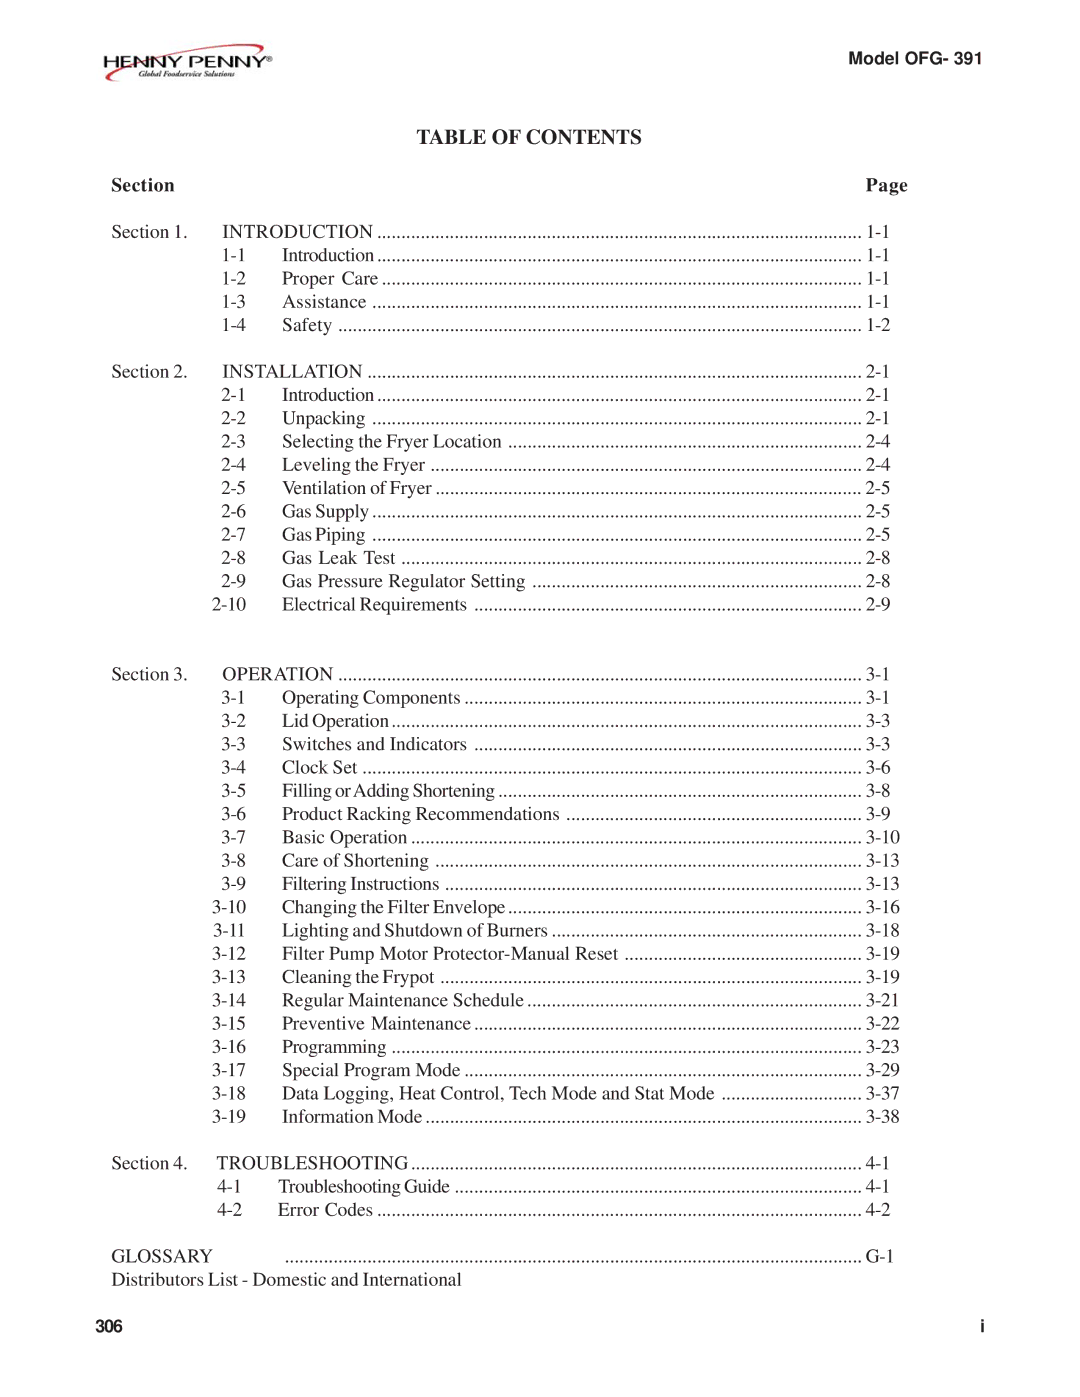 Henny Penny OFG-391 manual Table of Contents 